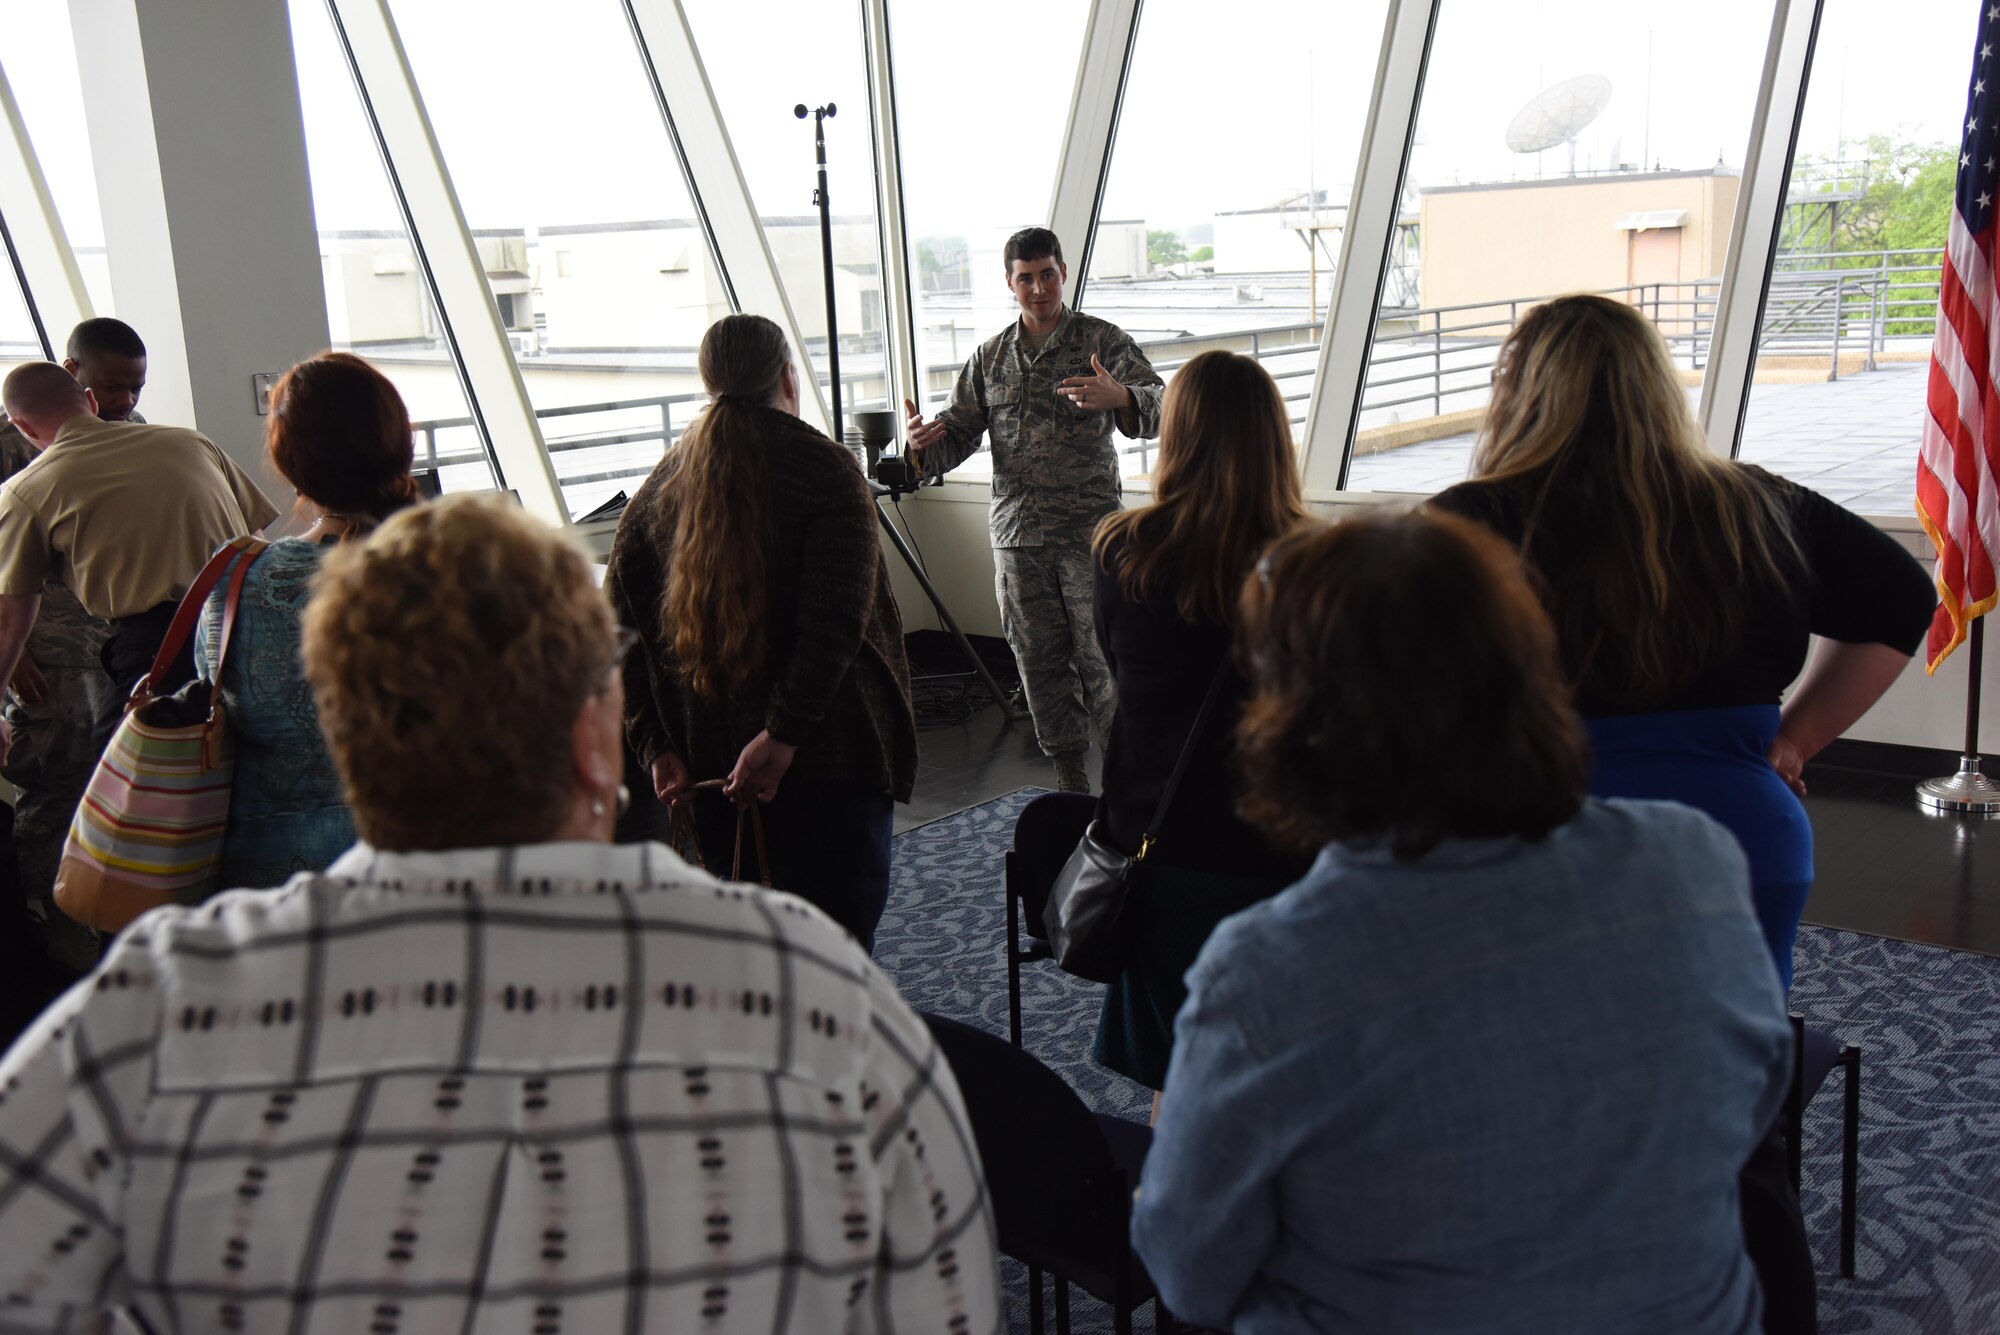 Staff Sgt. Jacob Hale, 335th Training Squadron instructor, briefs educators on weather training equipment at the Weather Training Complex during a NASA Educator Workshop, March 30, 2017, on Keesler Air Force Base, Miss. NASA teamed up with 335th TRS weather instructors and the 403rd Wing Hurricane Hunters to provide teachers from Mississippi and Louisiana with available resources, techniques and best practices for use in their classrooms. (U.S. Air Force photo by Kemberly Groue)